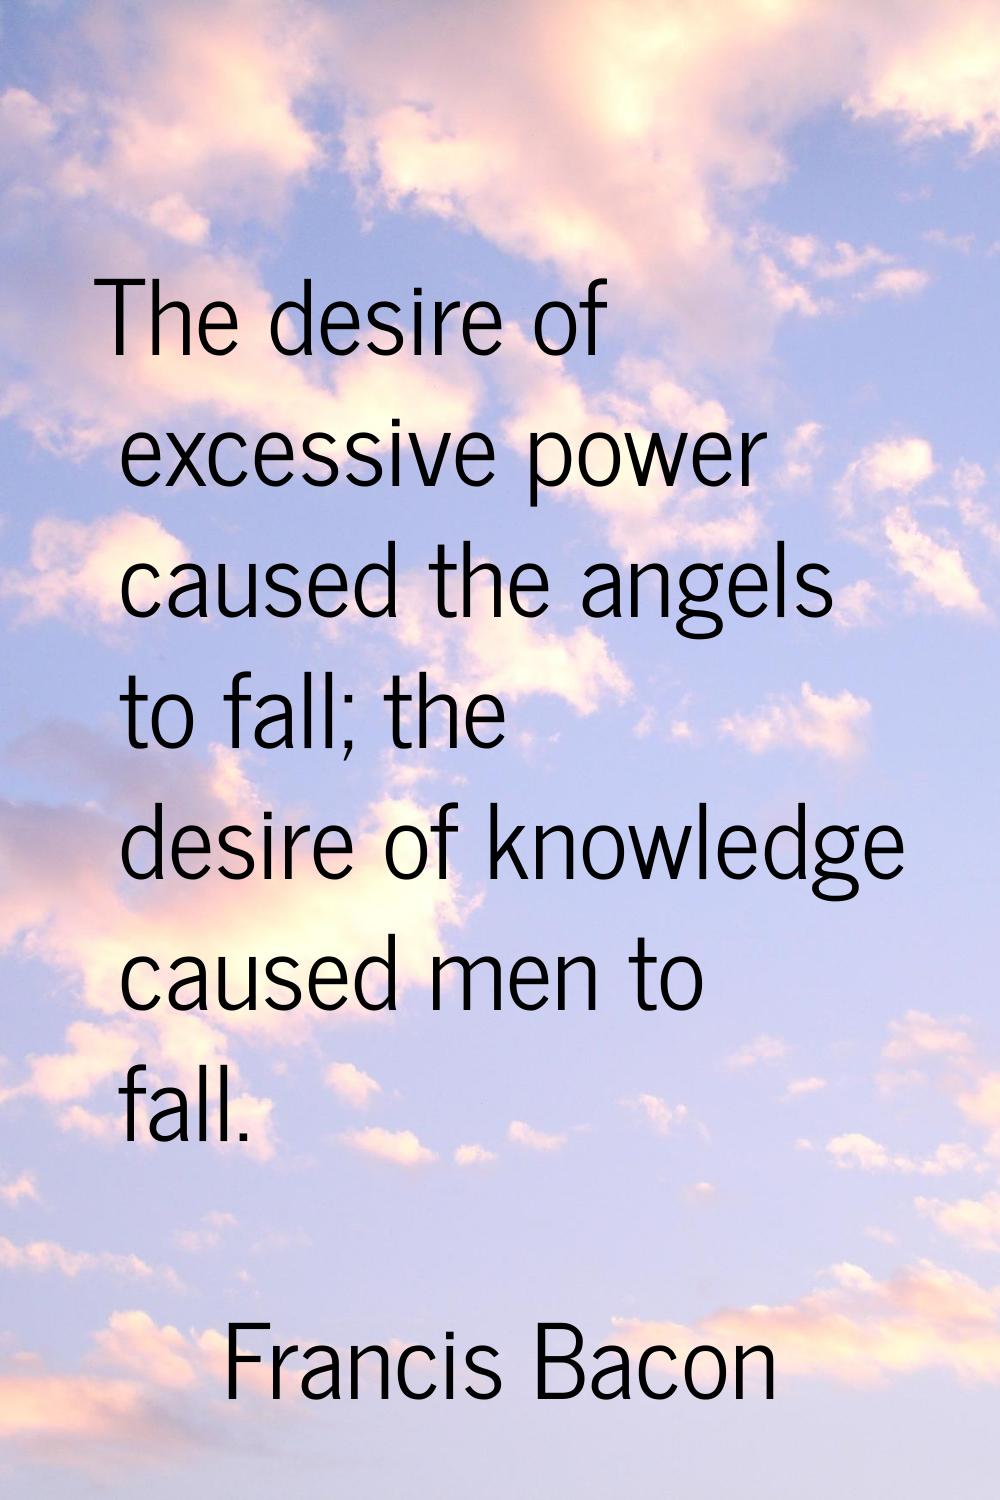 The desire of excessive power caused the angels to fall; the desire of knowledge caused men to fall